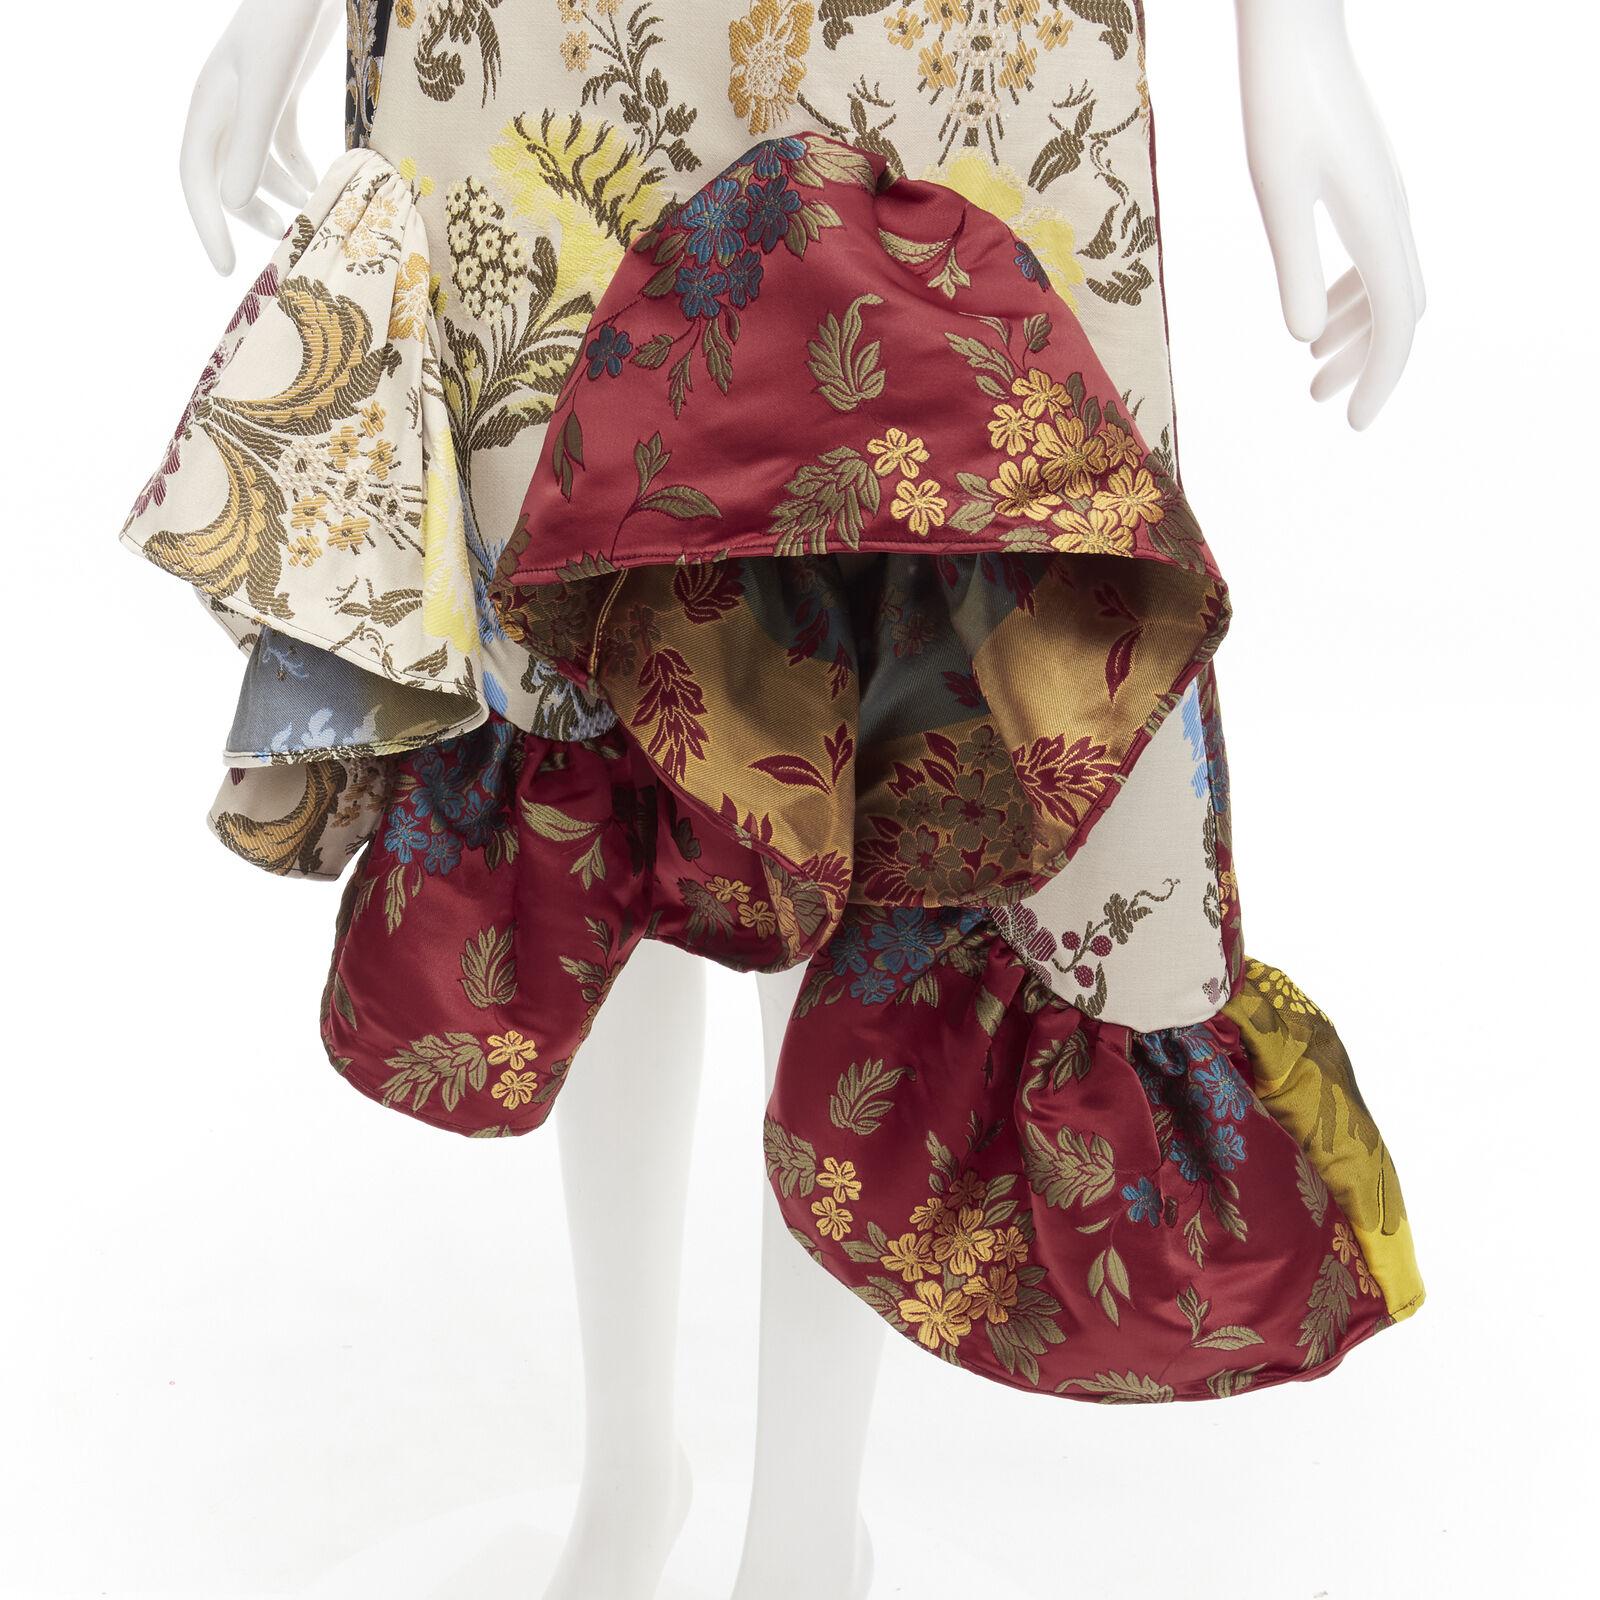 MARQUES ALMEIDA Net Sustain Remade 2020 patchwork brocade ruffled skirt UK6 XS
Reference: AAWC/A00439
Brand: Marques Almeida
Collection: 2020 NET SUSTAIN REMADE
Material: Polyester, Blend
Color: Multicolour
Pattern: Floral
Closure: Zip
Extra